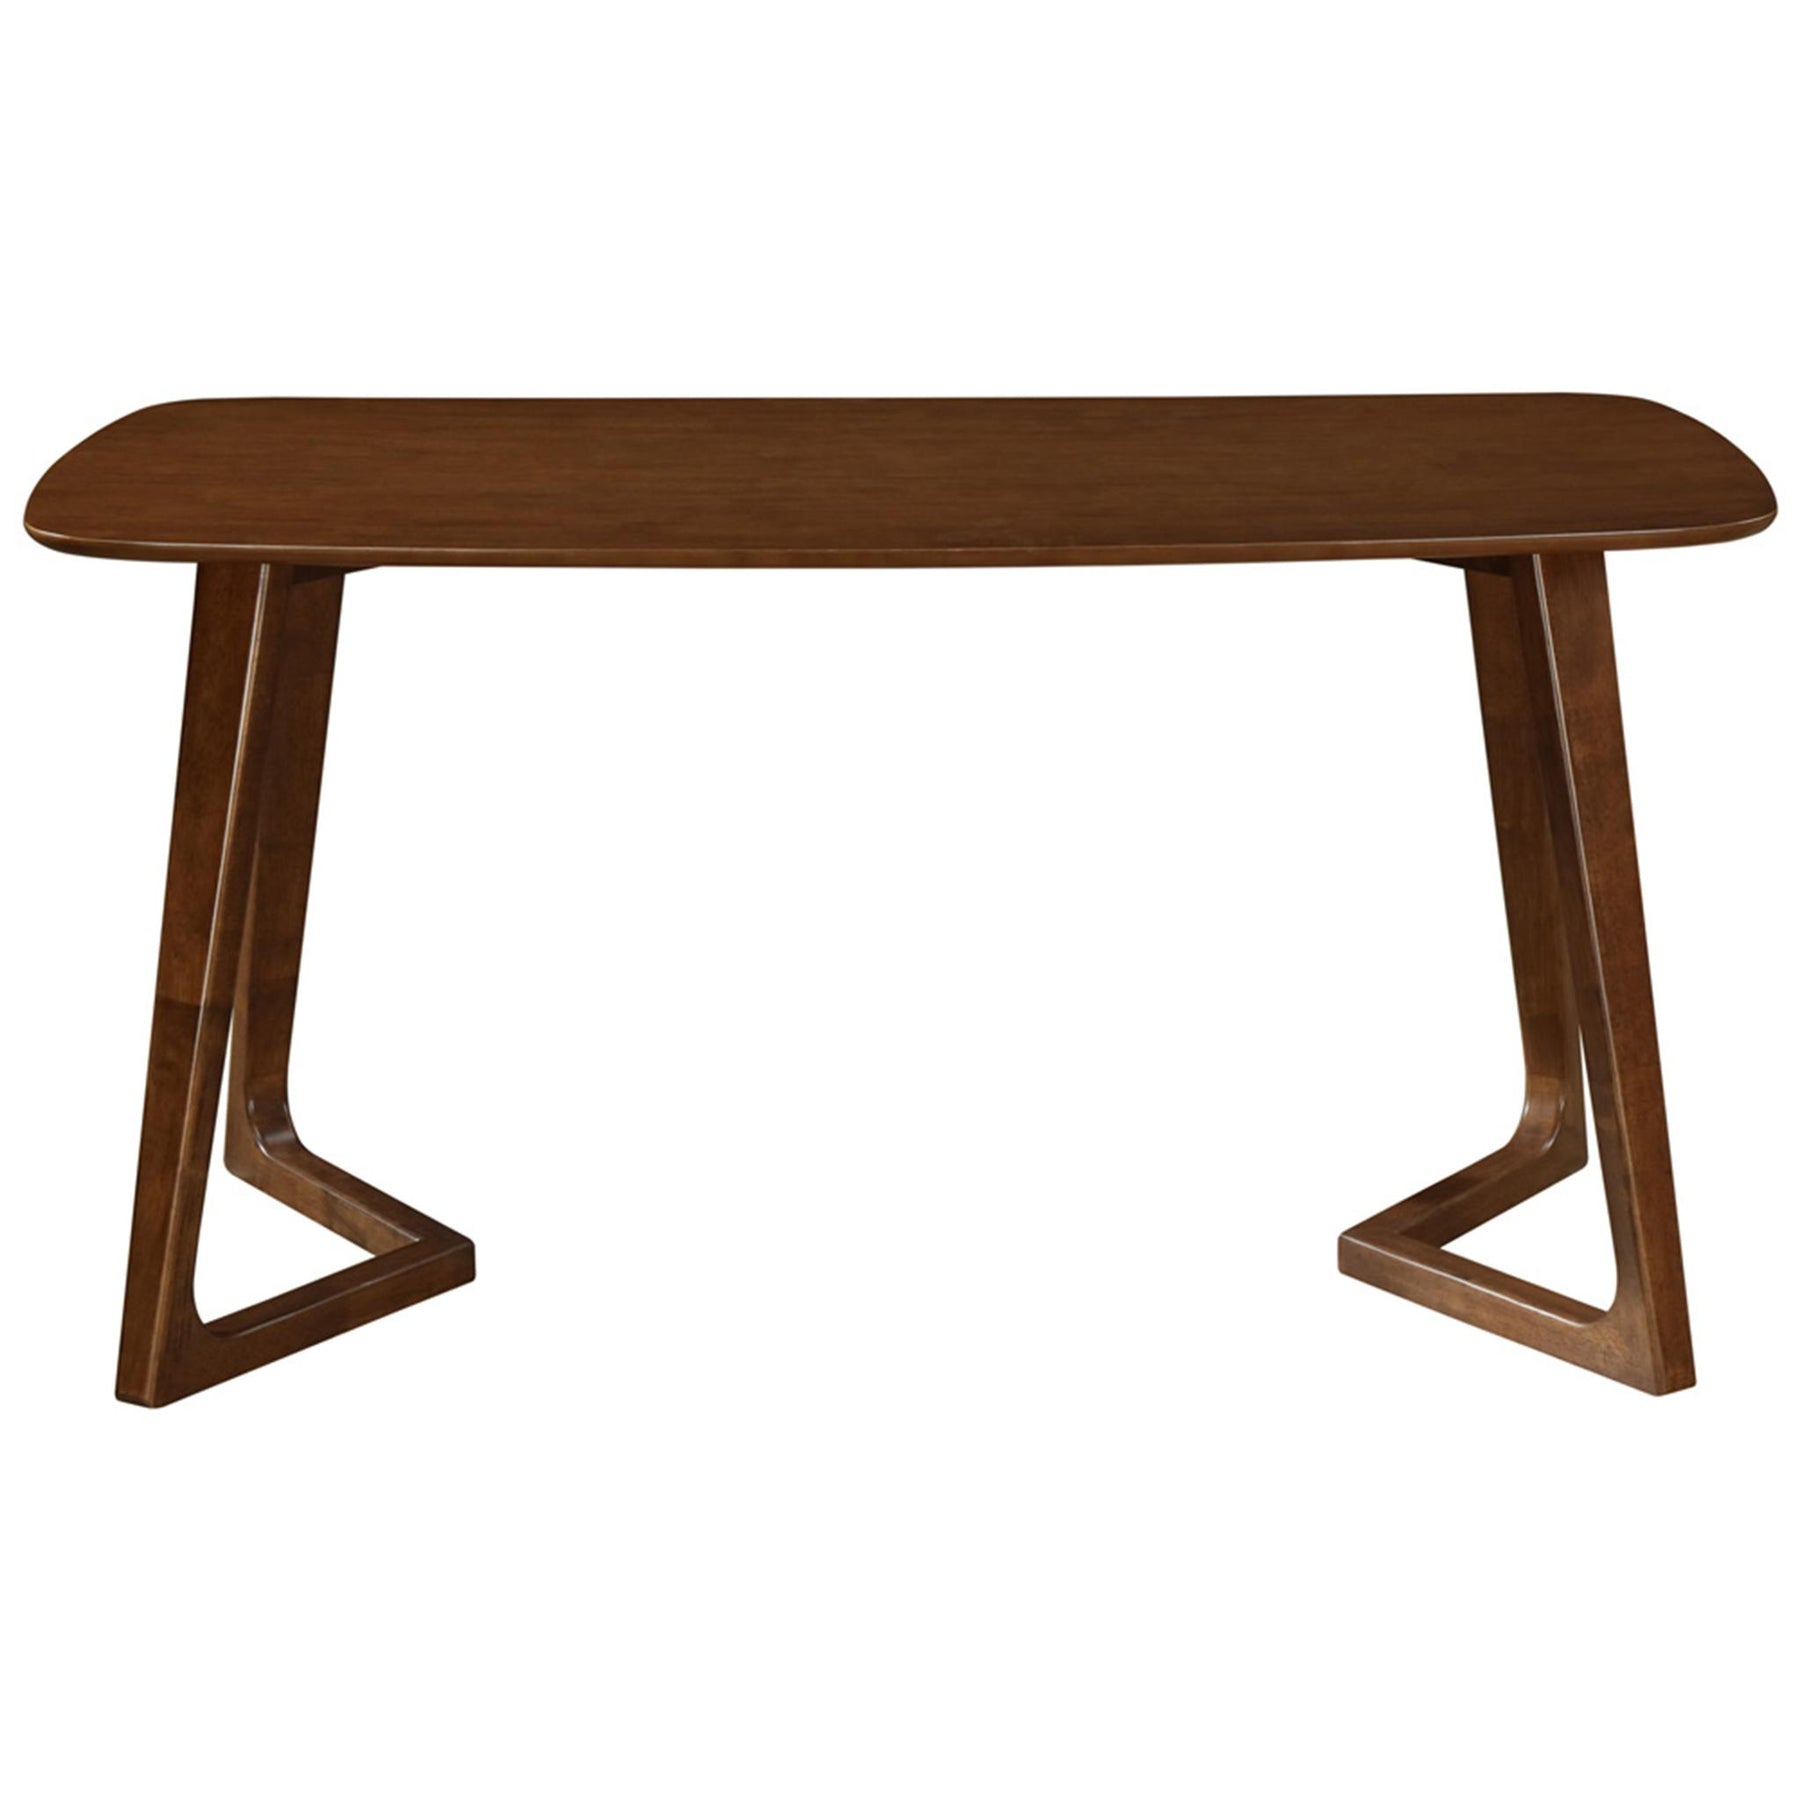 Paddington Rectangular Dining Table by New Pacific Direct - 1320006